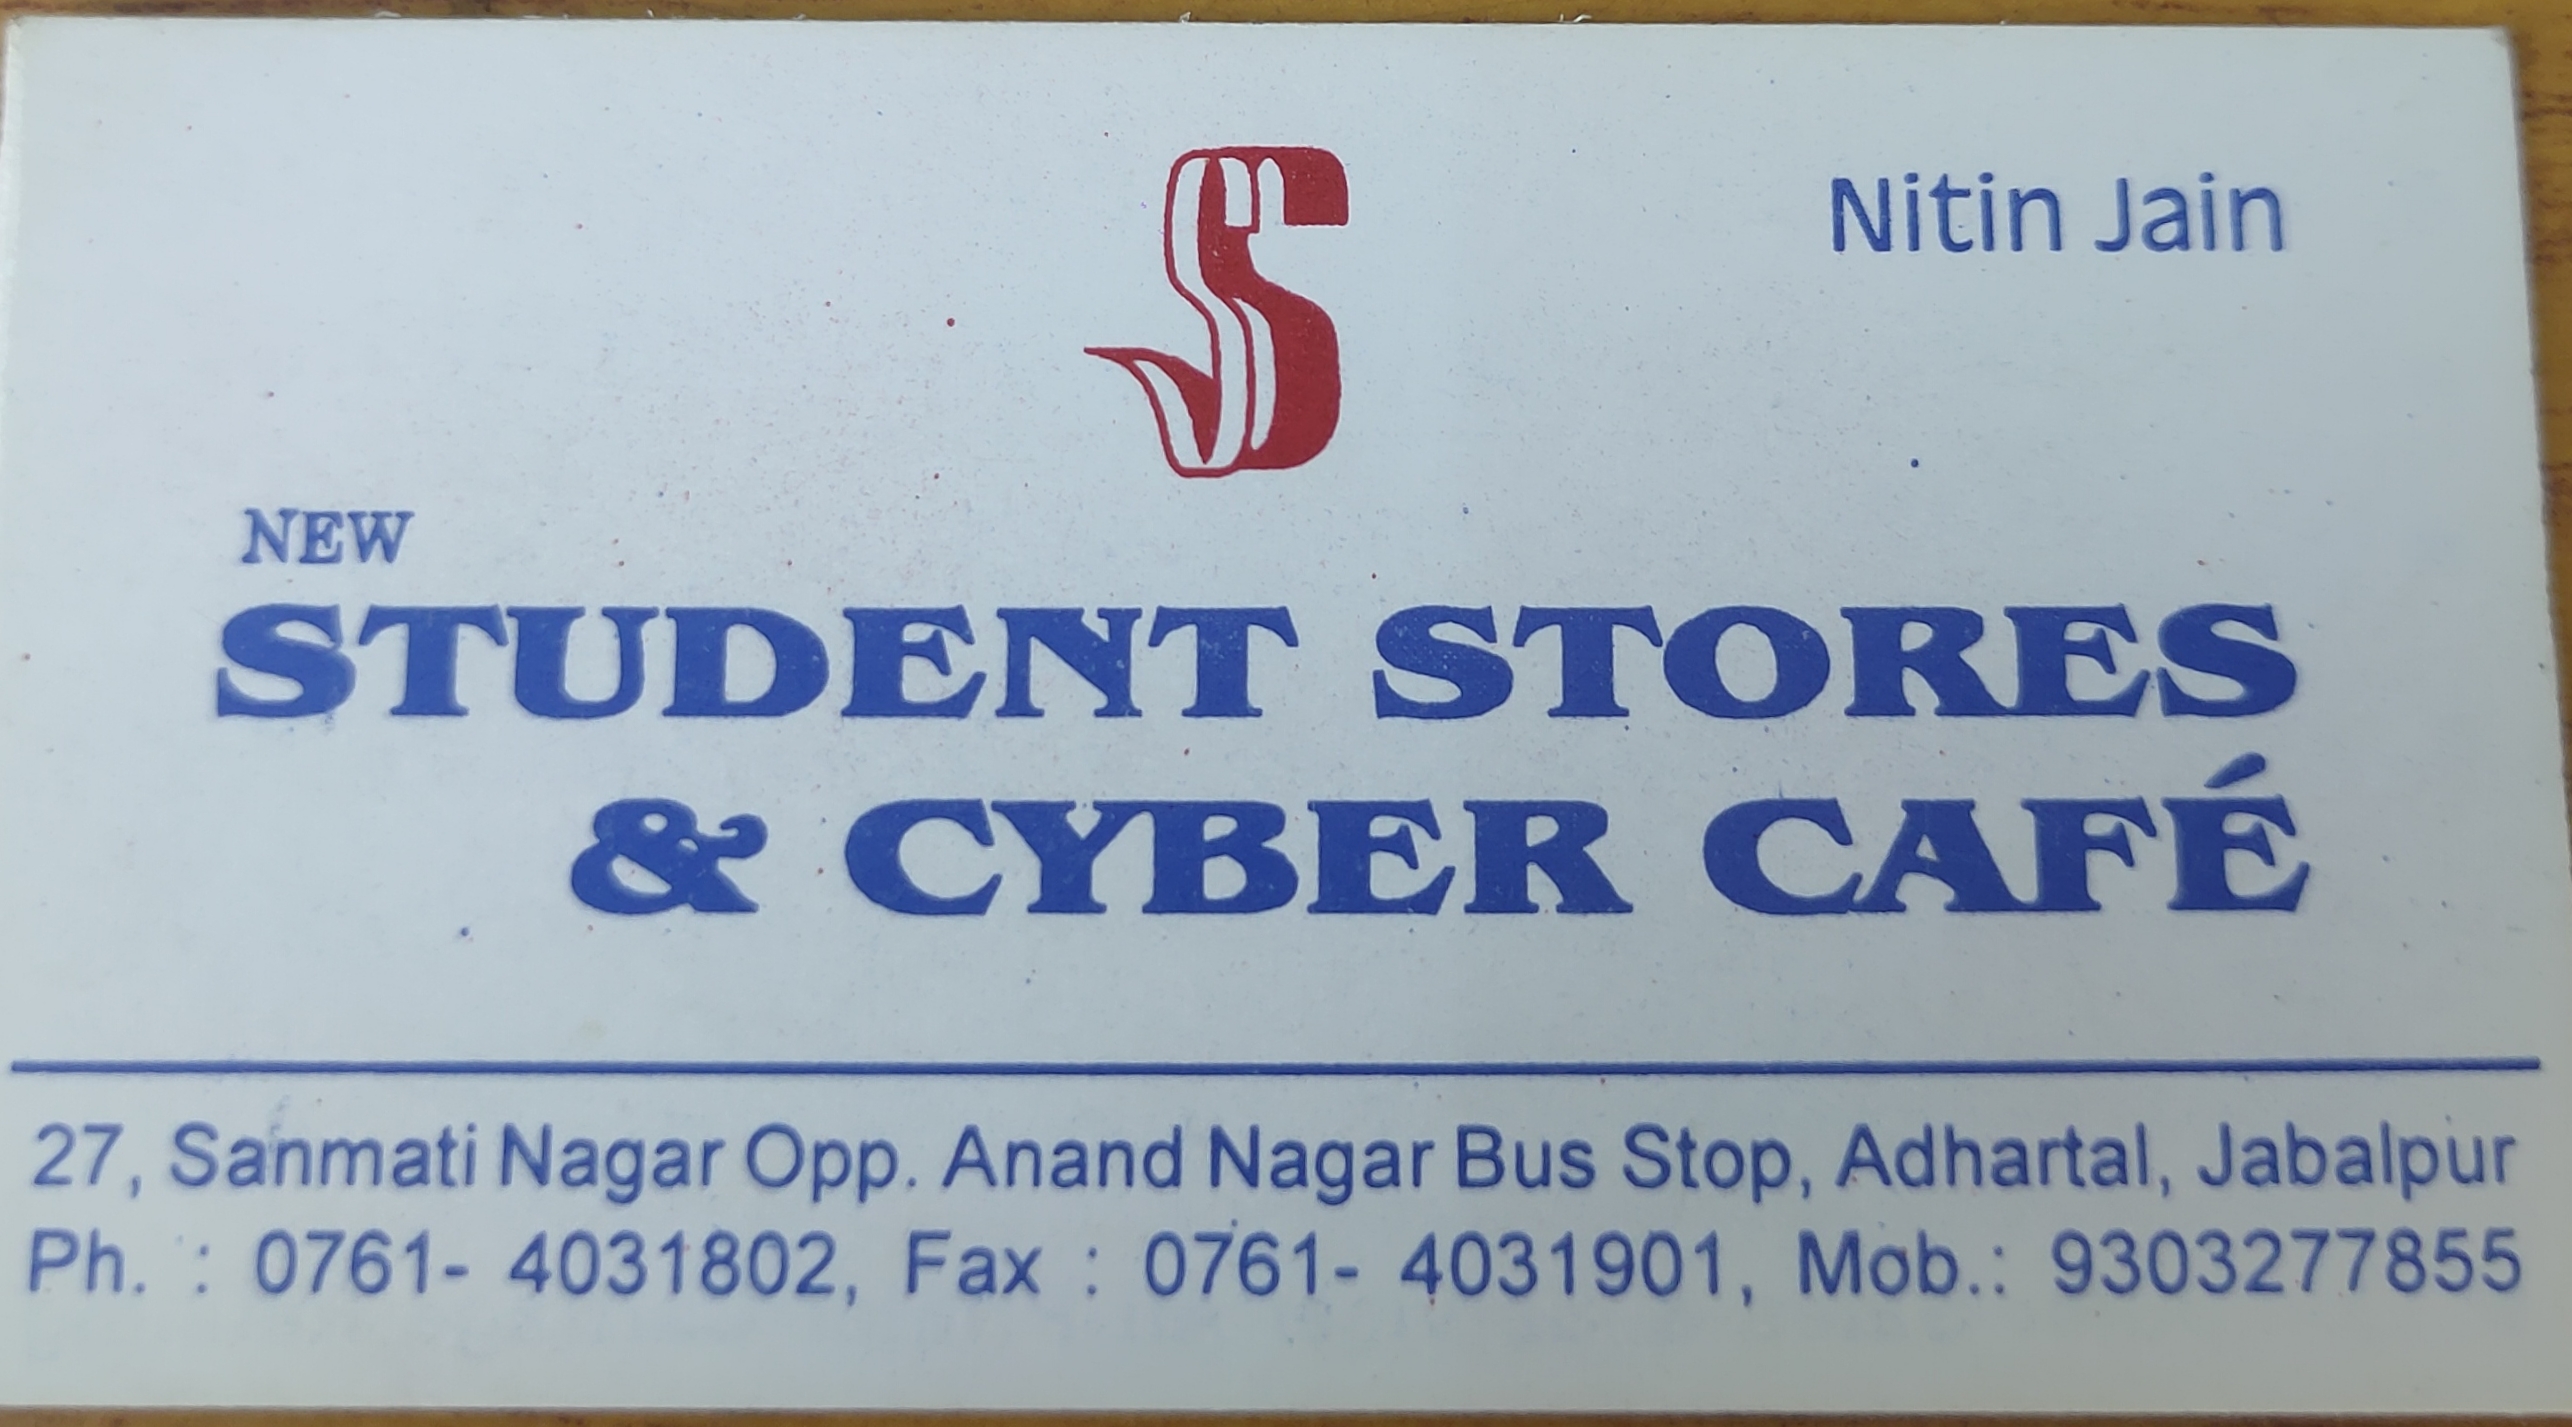 Students Stores & Cyber Cafe Jabalpur